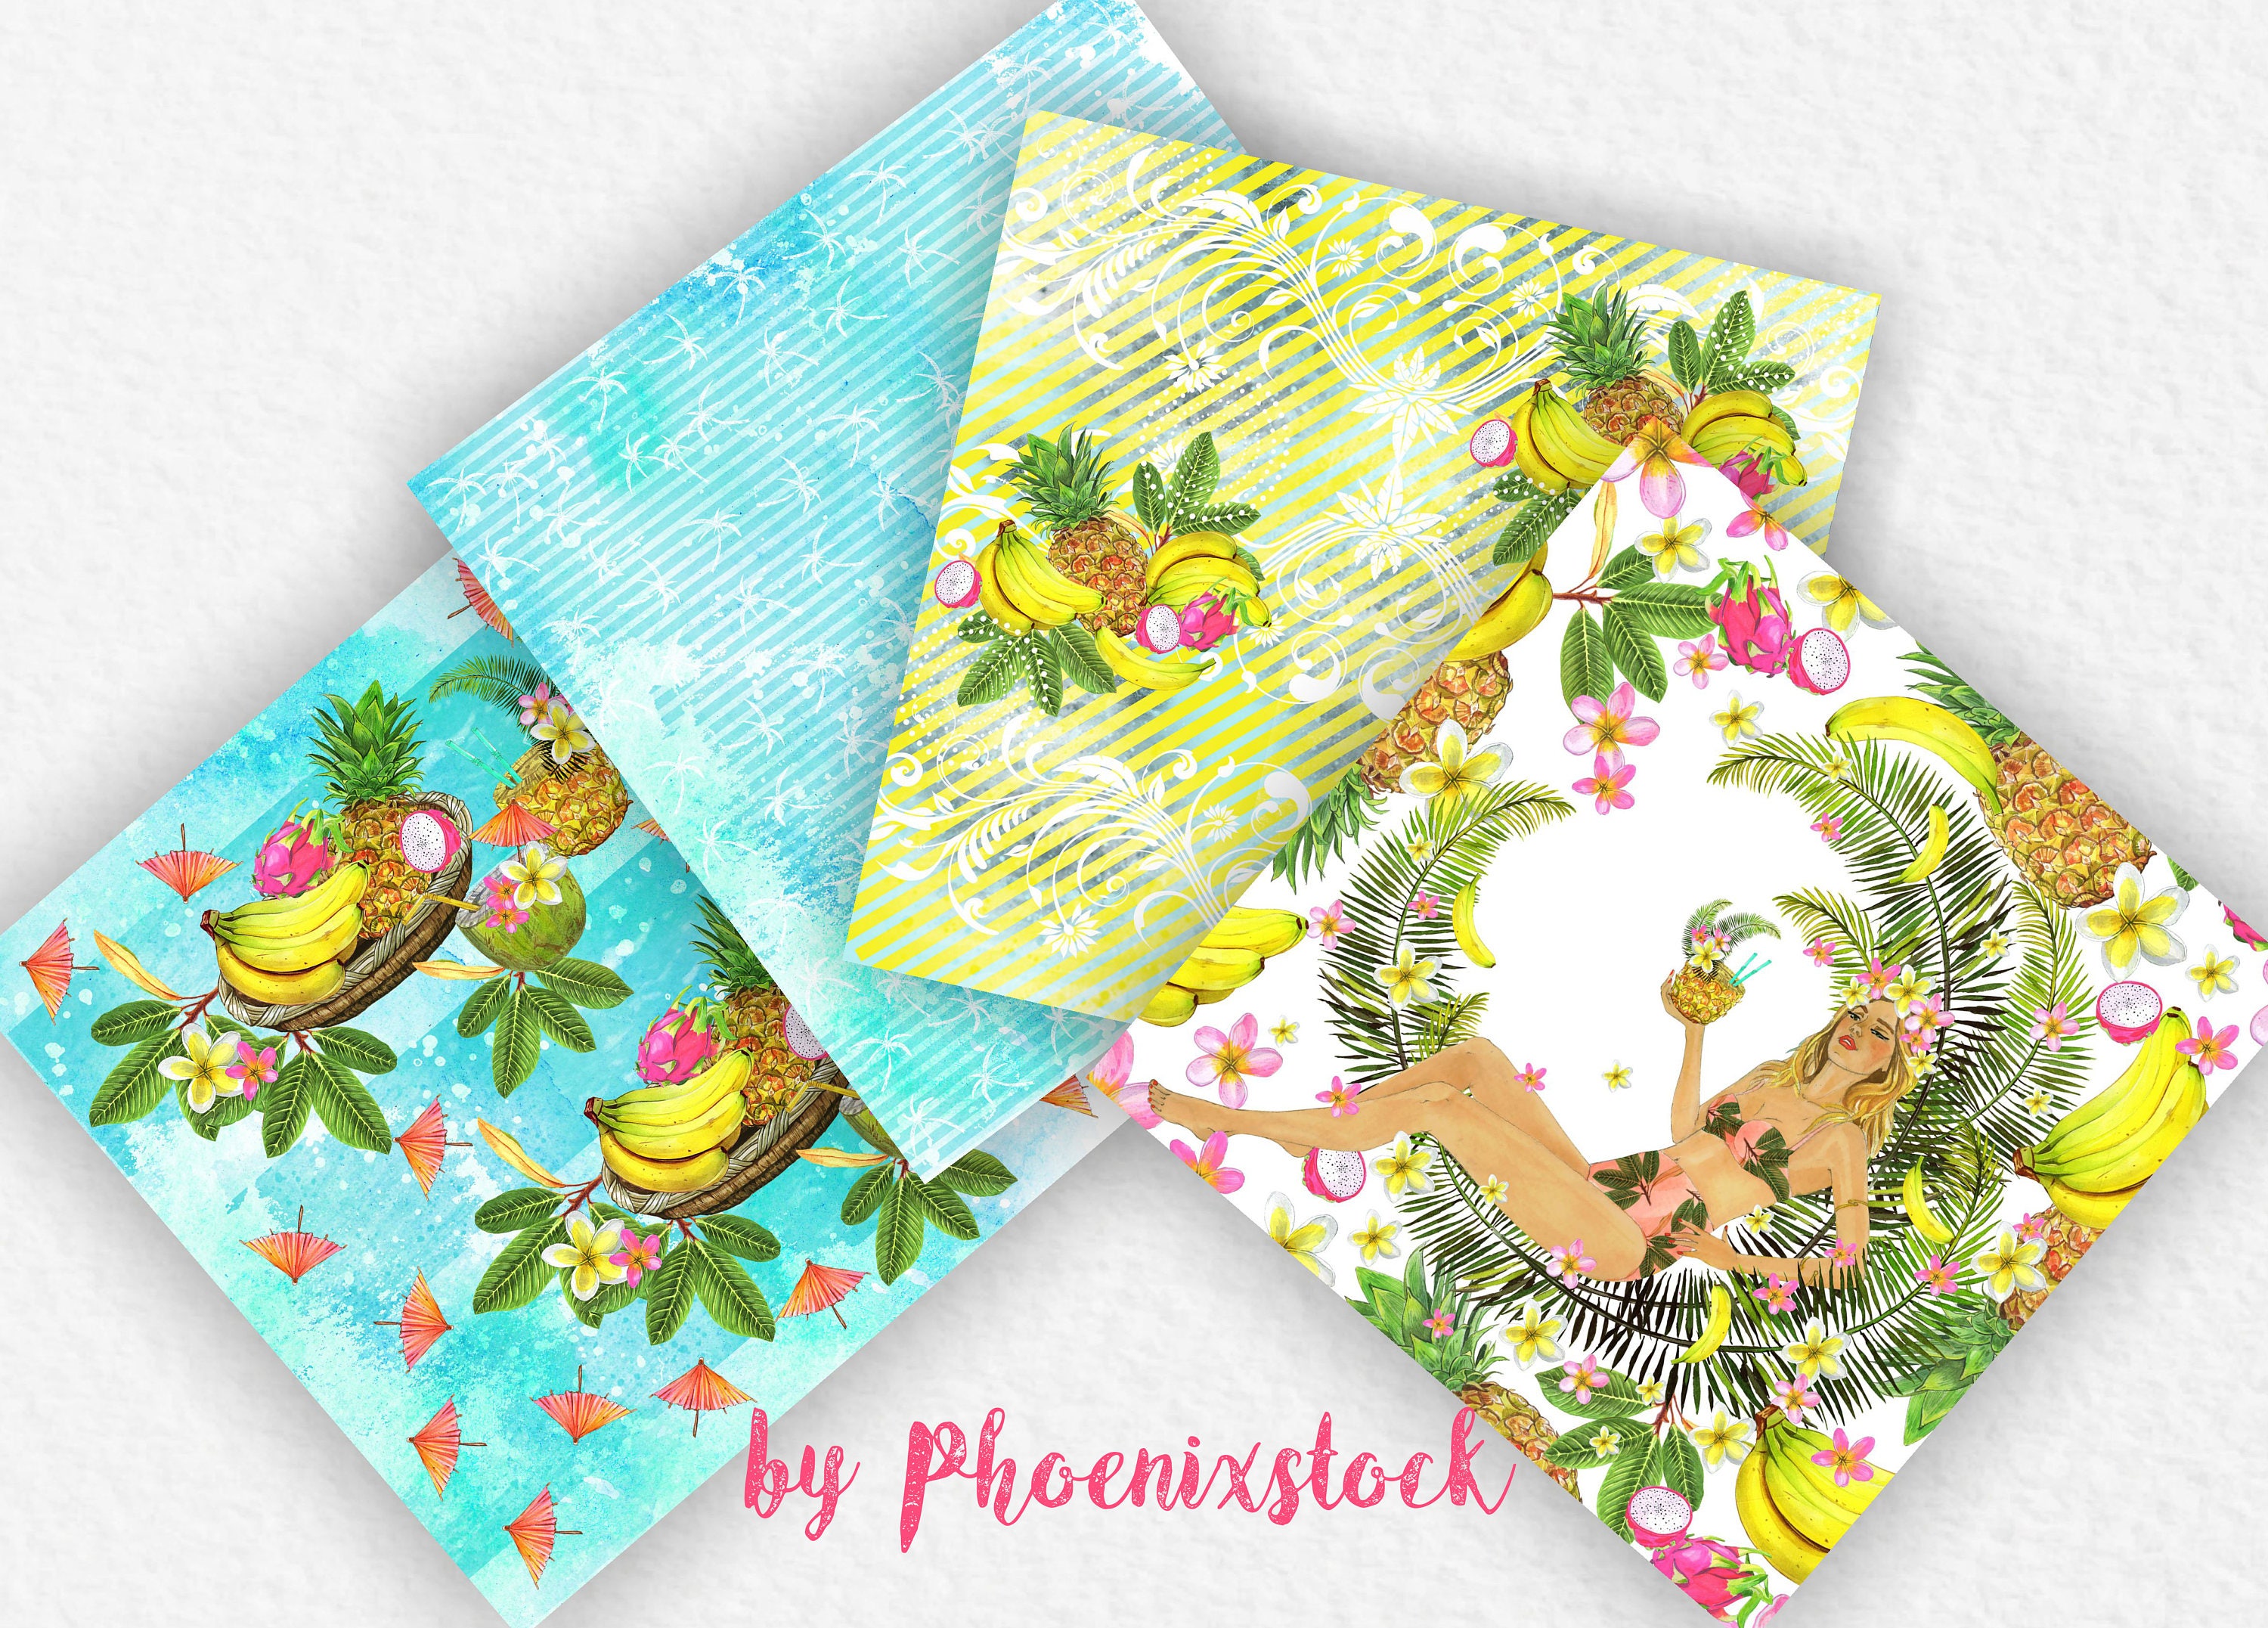 Tropical Island Digital Paper Pack for Scrap-booking and Paper Craft